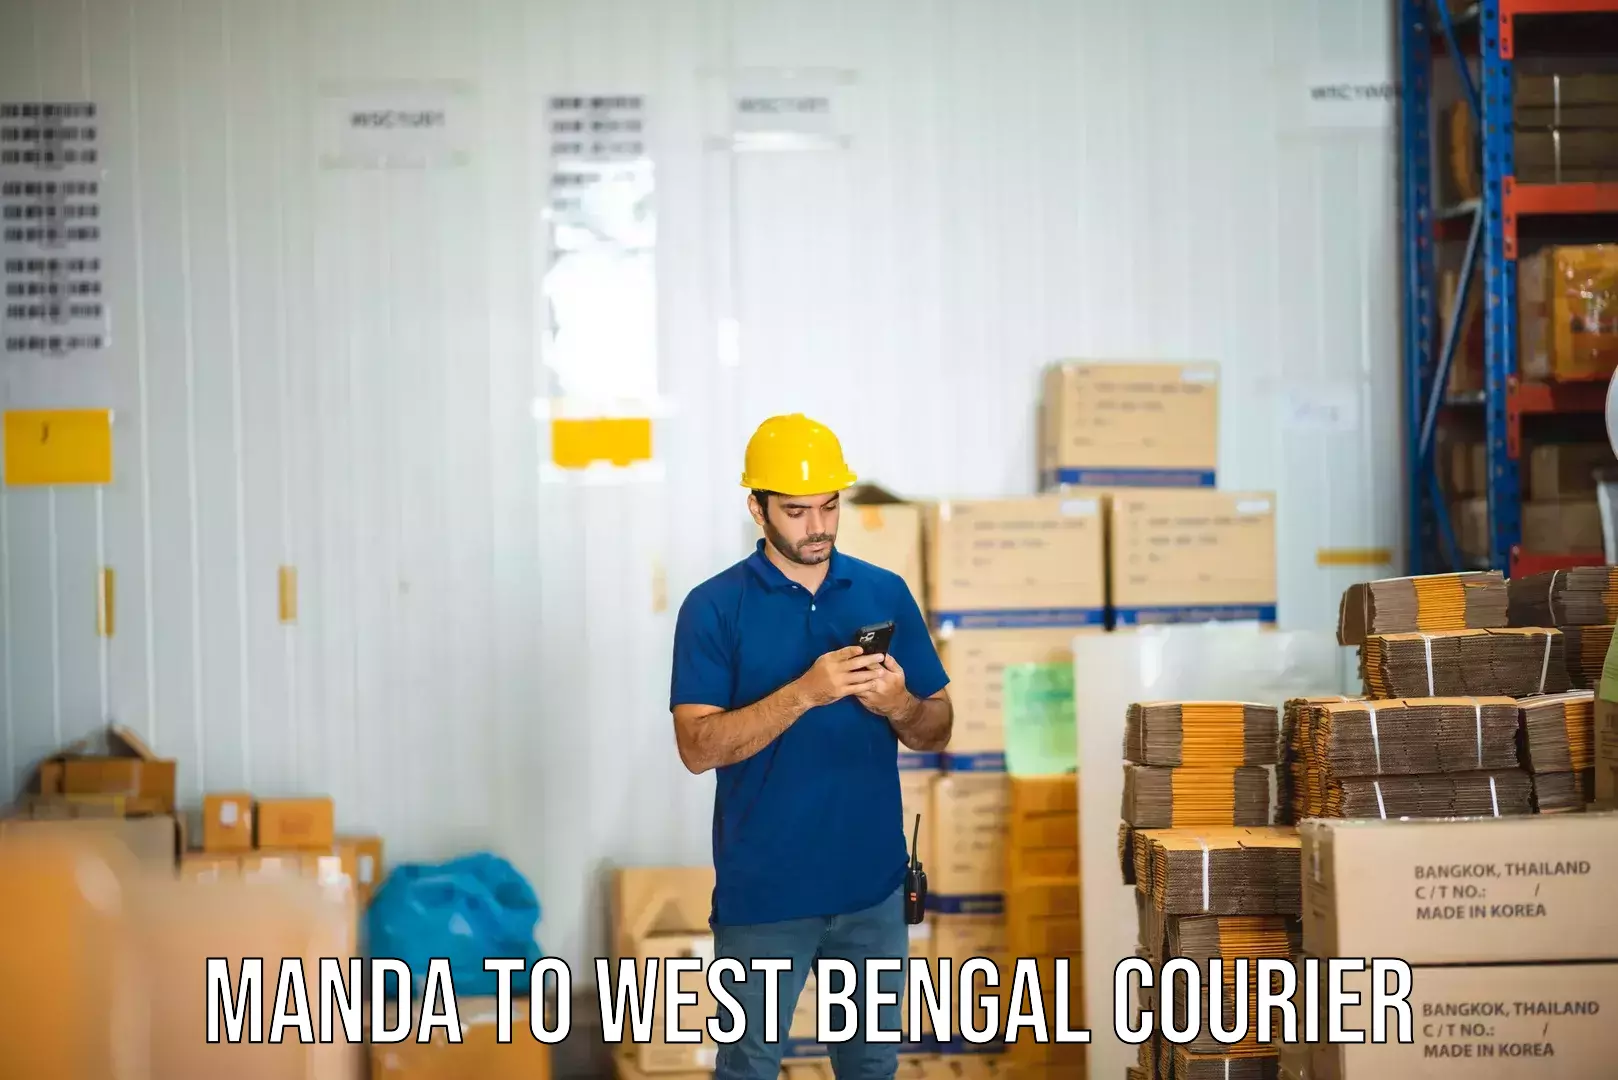 Efficient freight service Manda to West Bengal